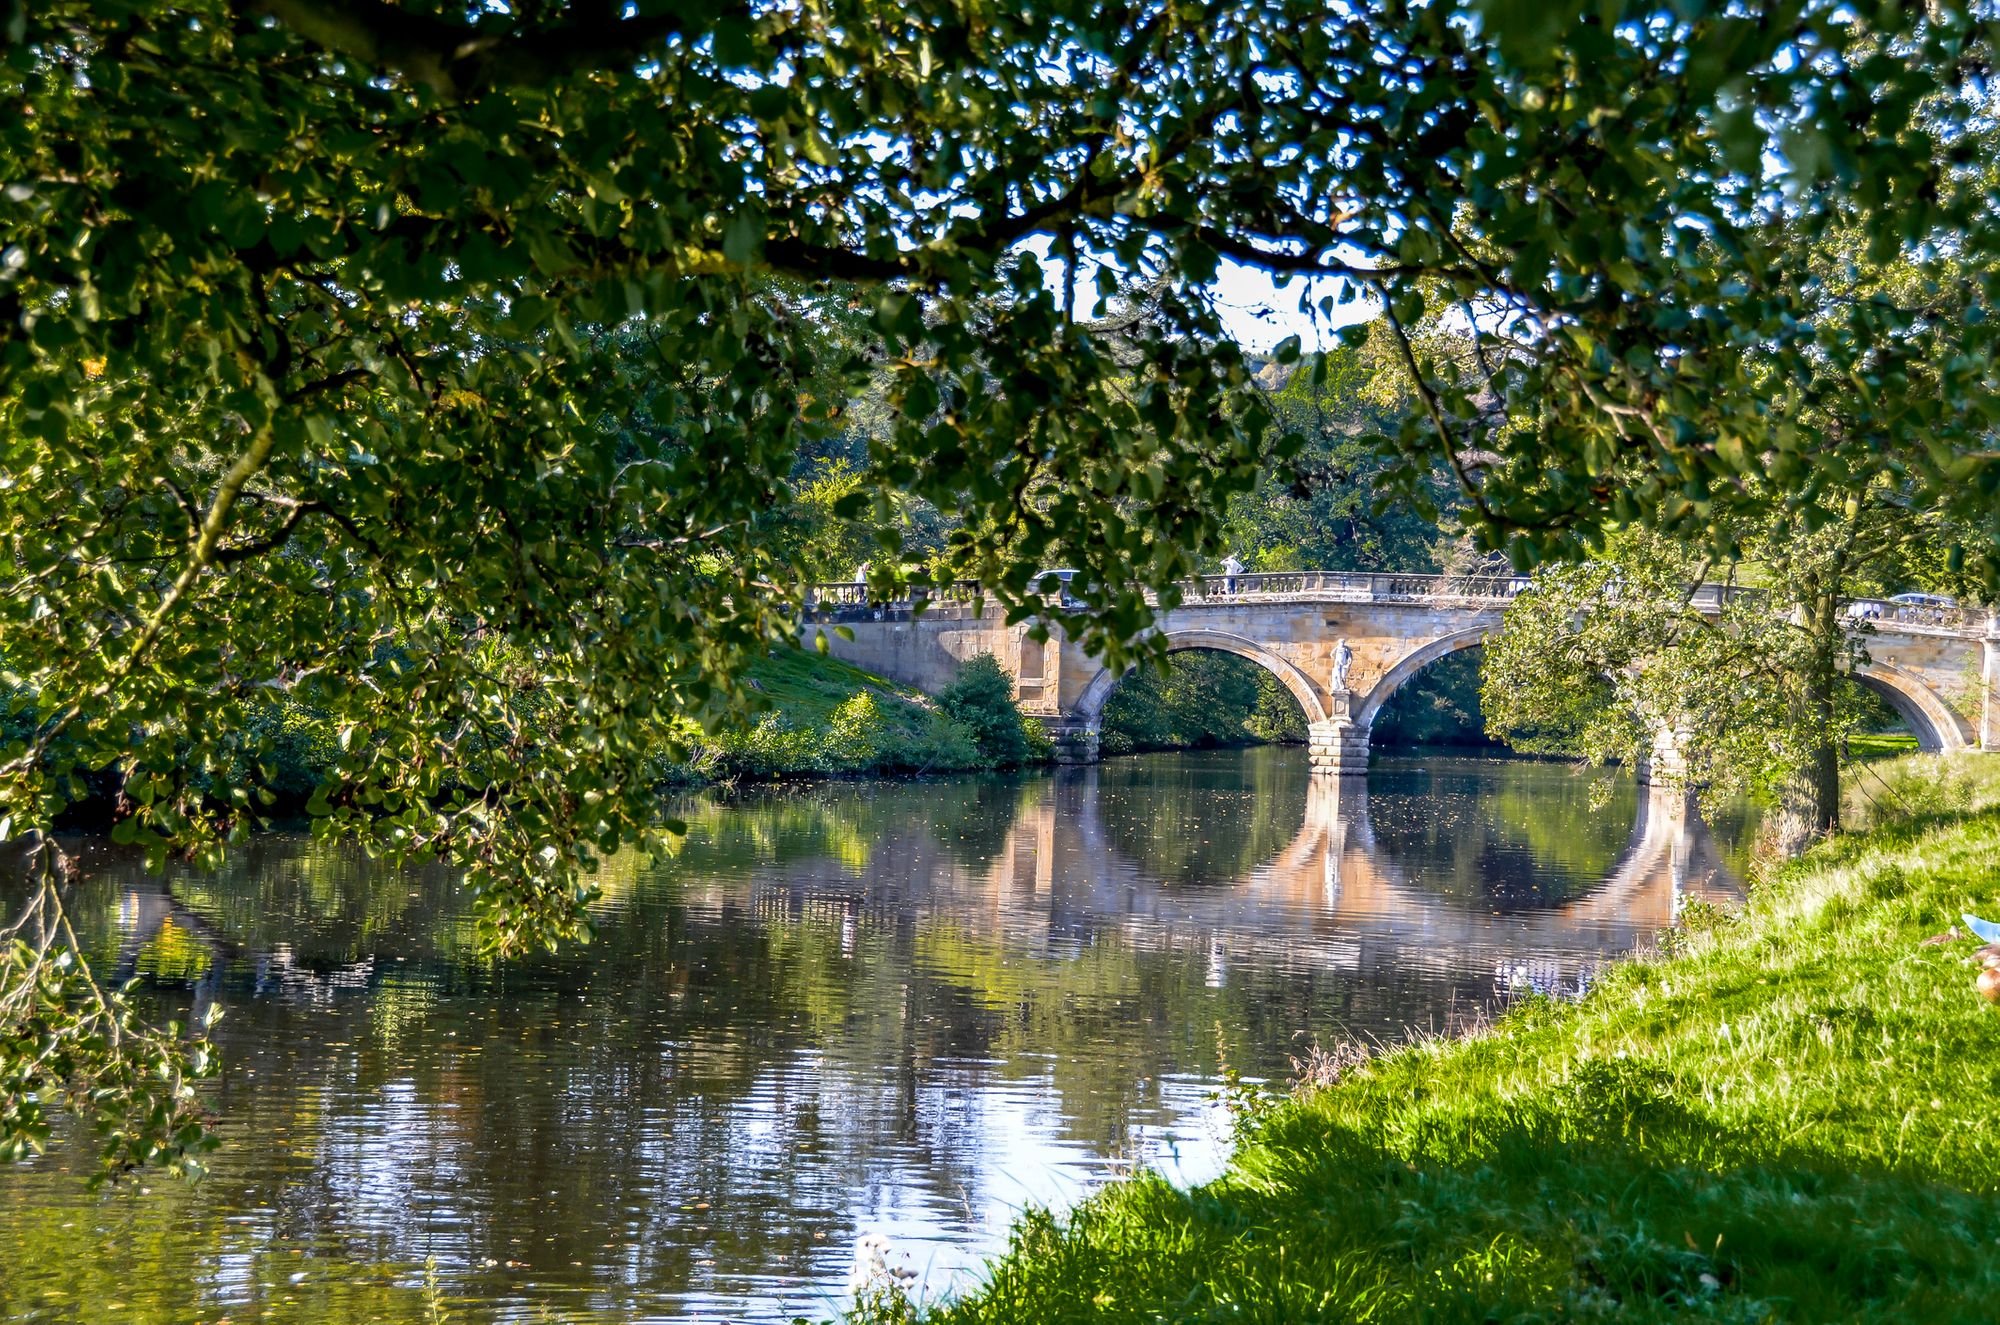 Stately bridge across the river in Chatsworth Estate, on a lush river in the Peak District.